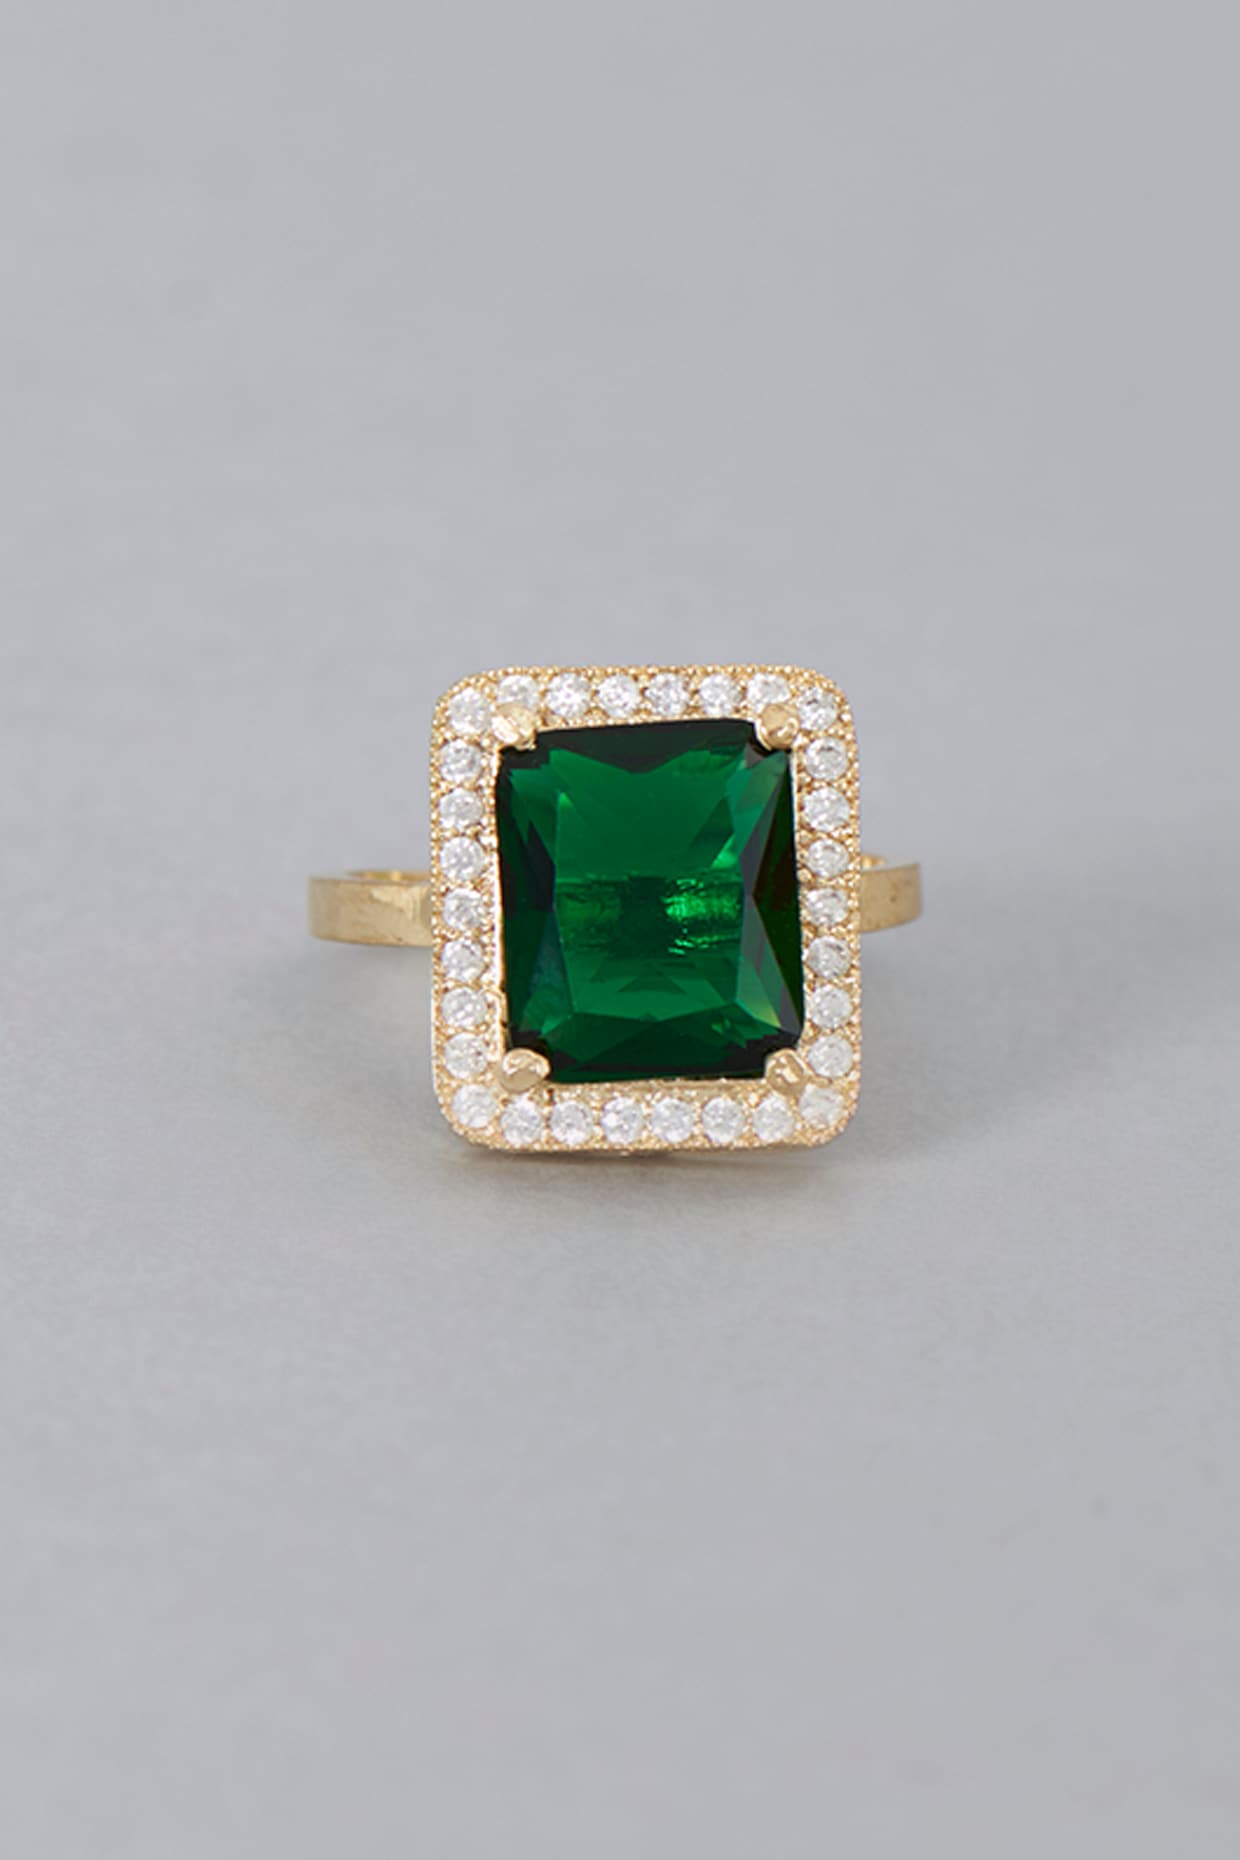 Emerald Stone: A Complete Guide on Emerald Stone Benefits - eAstroHelp